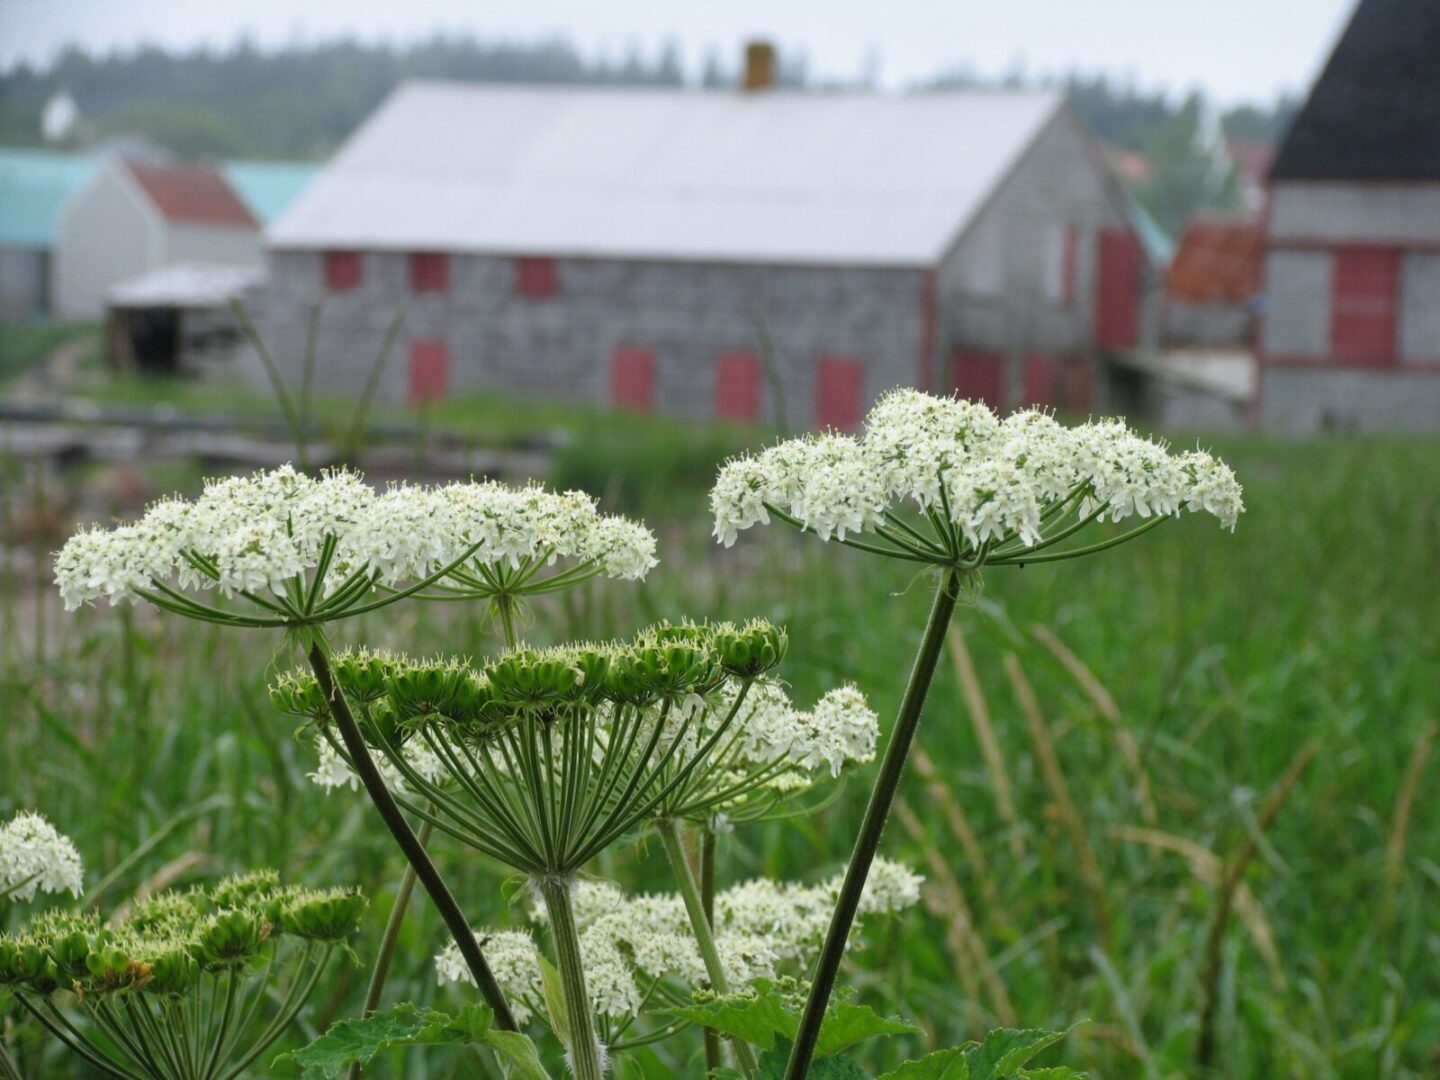 White flowers in front of a red barn.